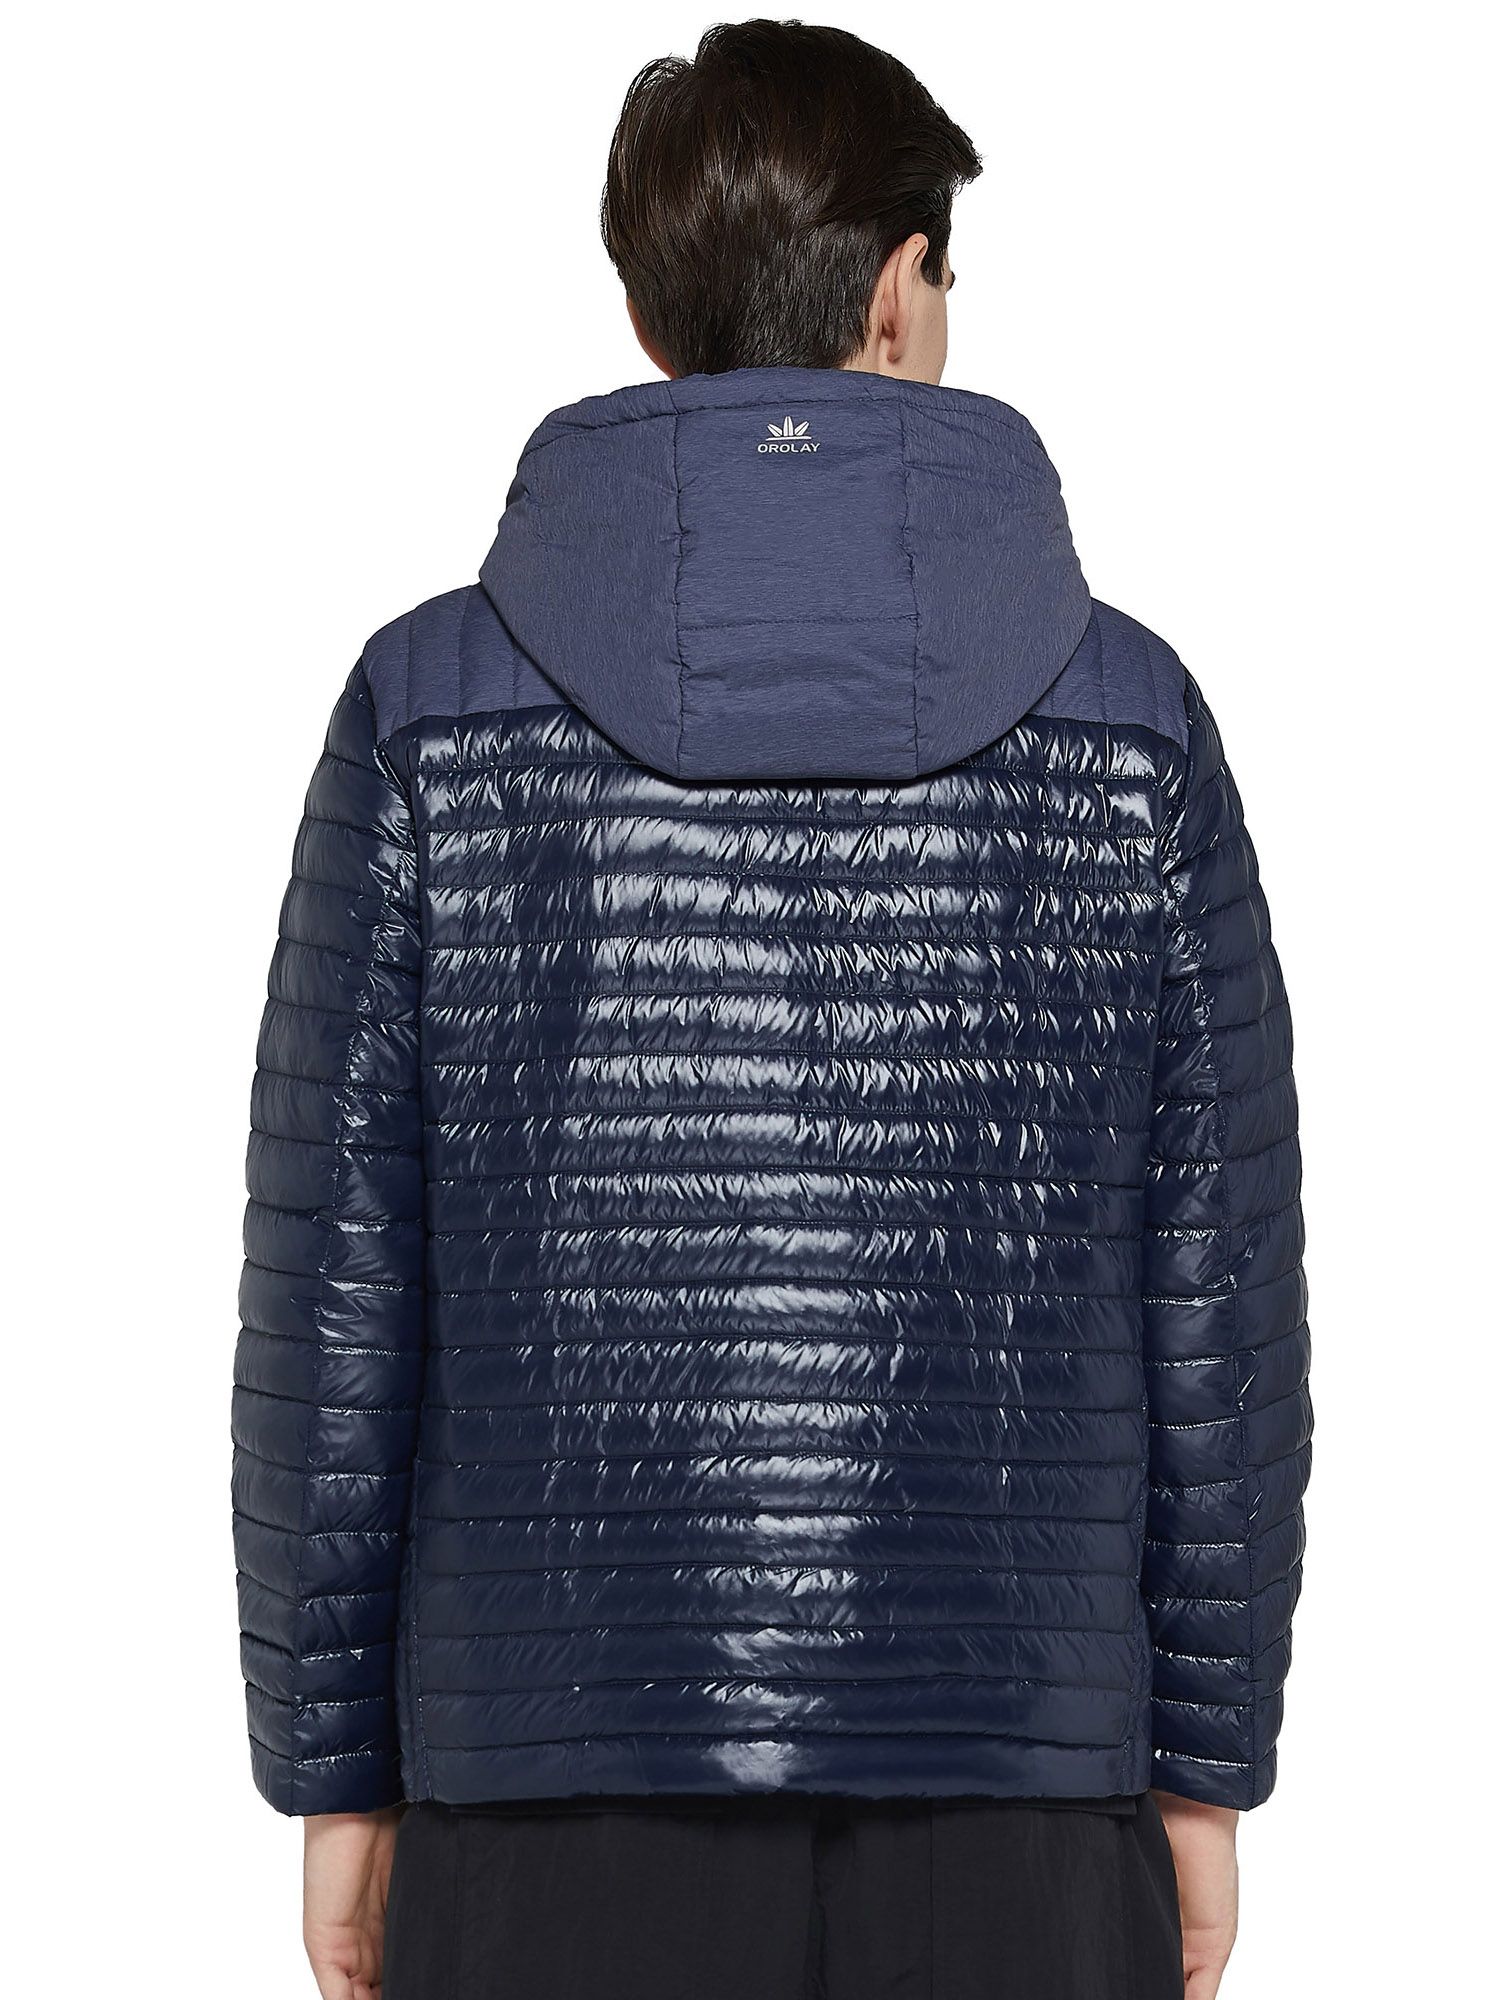 Orolay Men's Long Hooded Winter Down Jacket Warm Puffer Jacket - image 3 of 5